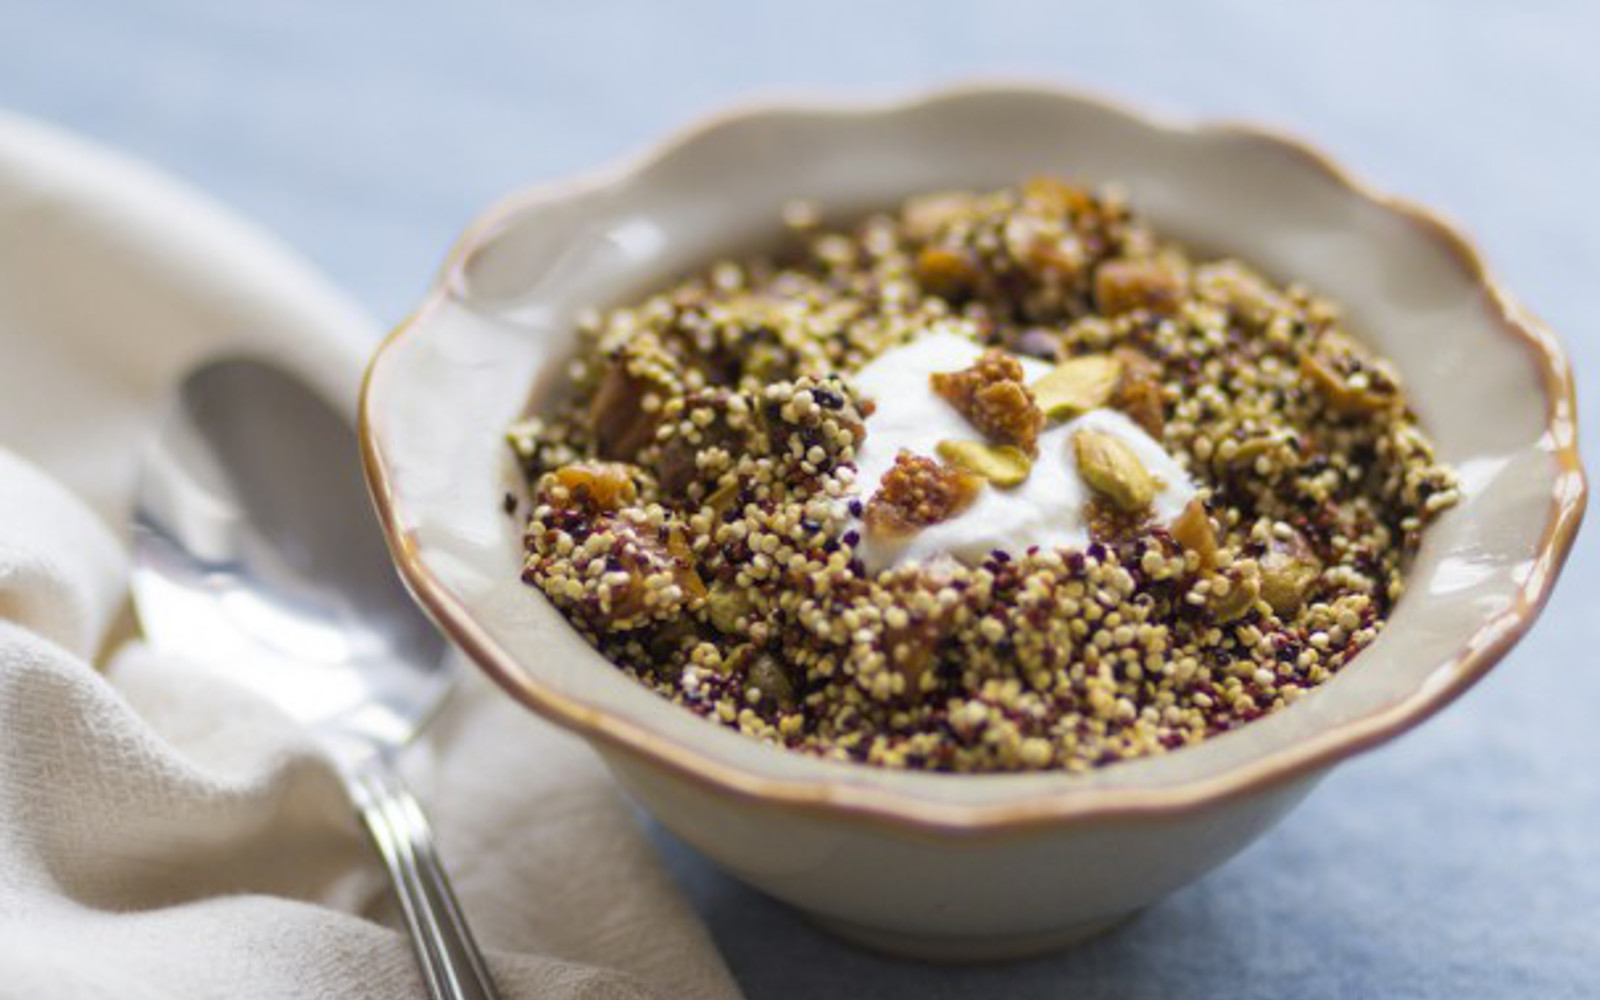 Toasted Quinoa Cereal With Pistachios and Figs